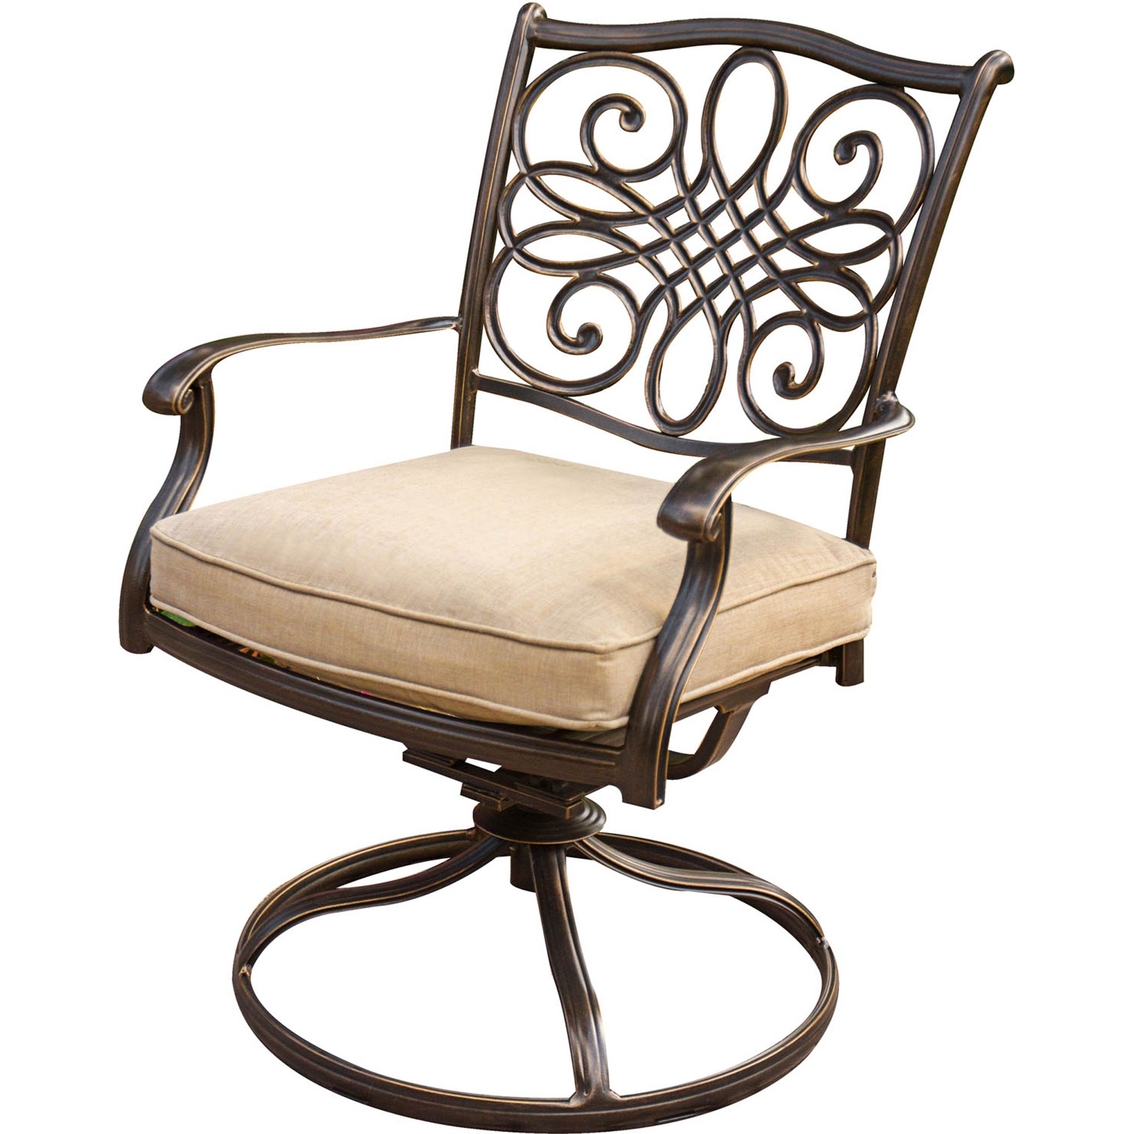 Hanover Traditions 9 pc. Outdoor Dining Set with Square Table and 8 Swivel Rockers - Image 3 of 3